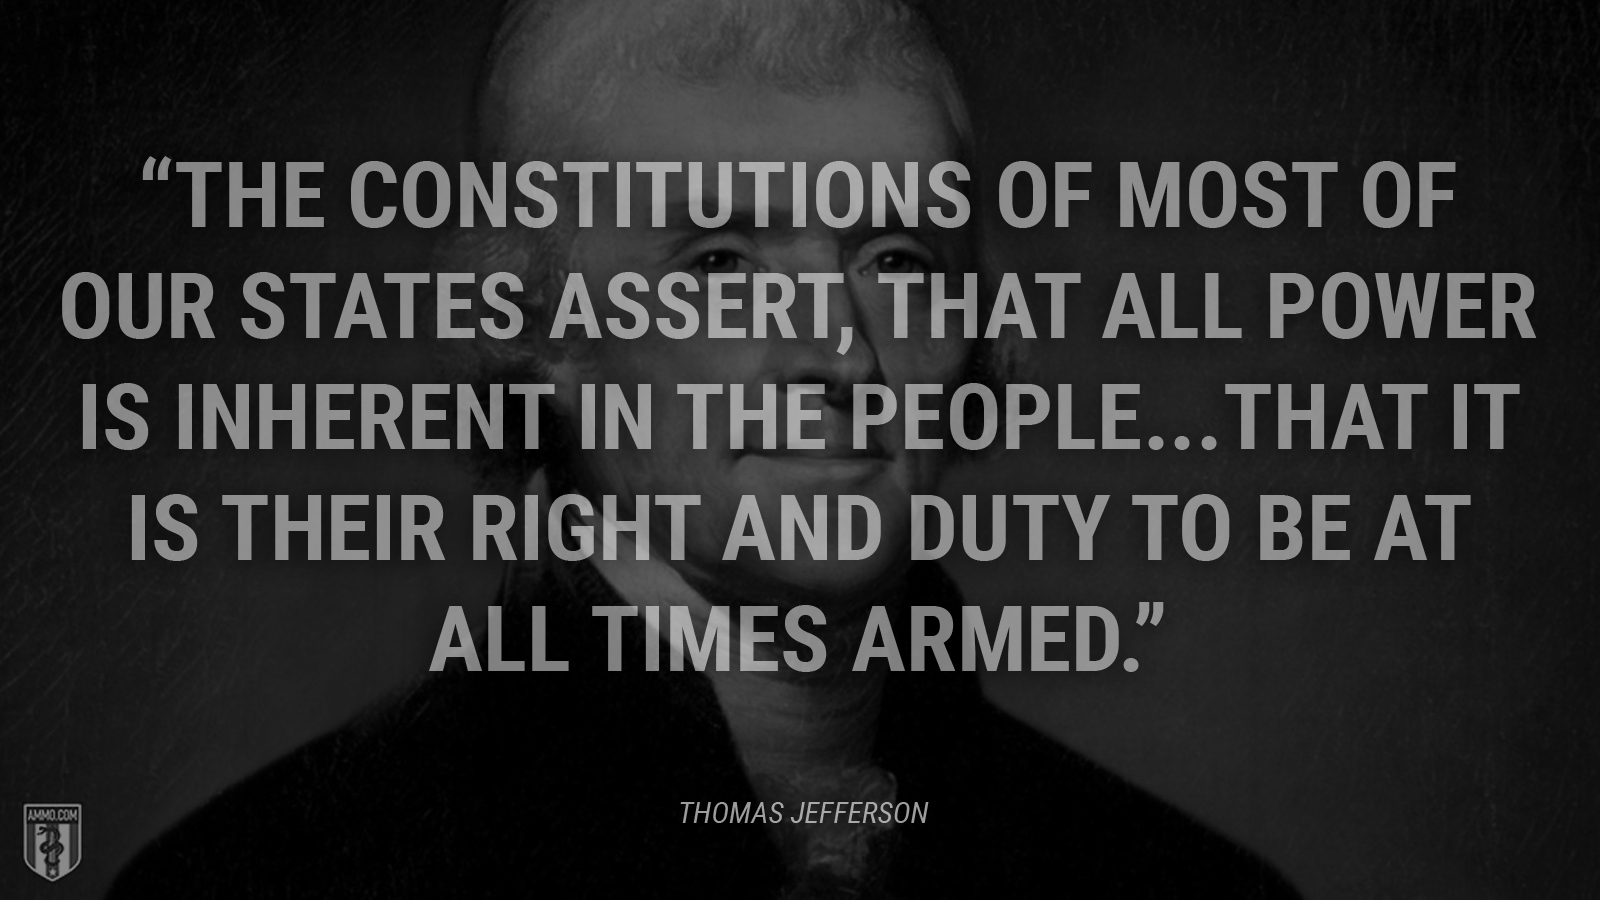 “The constitutions of most of our States assert, that all power is inherent in the people...that it is their right and duty to be at all times armed.” - Thomas Jefferson